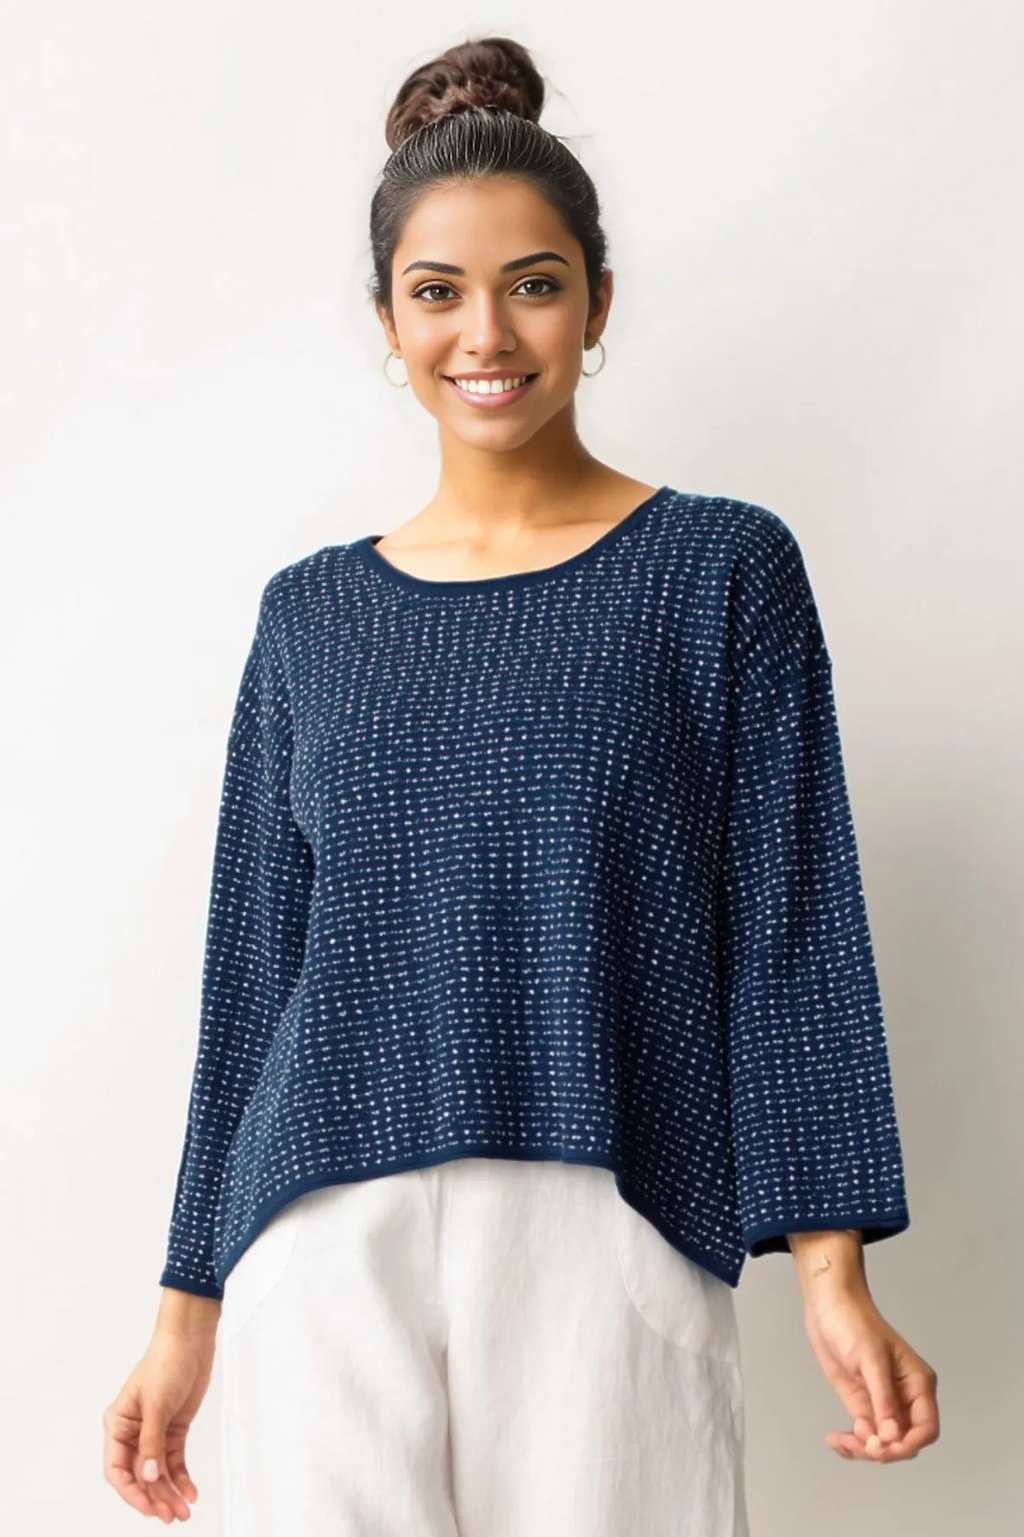 LIV by Habitat Textured Dot Sweater in Navy